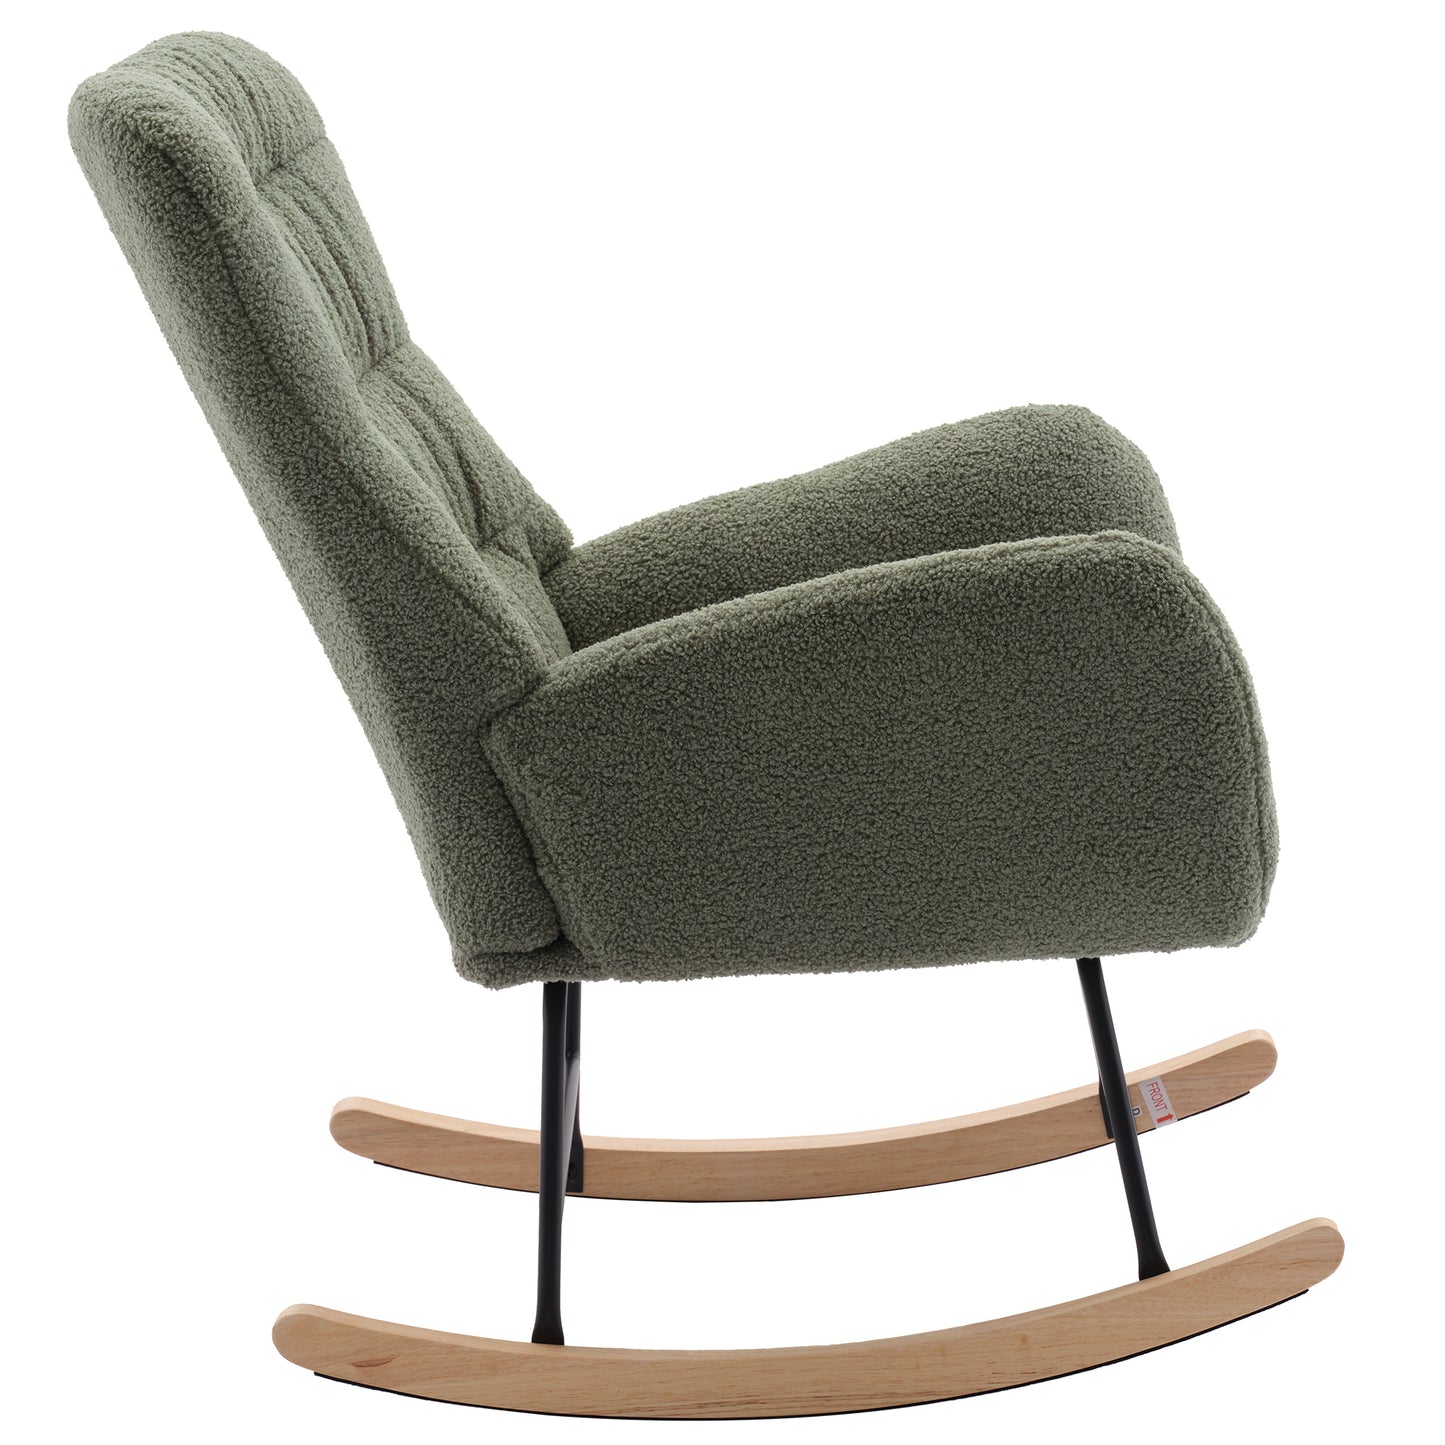 Nursery Rocking Chair, Teddy Upholstered Glider Rocker, Rocking Accent Chair with High Backrest, Comfy Rocking Accent Armchair for Living Room, Bedroom, Offices, GREEN